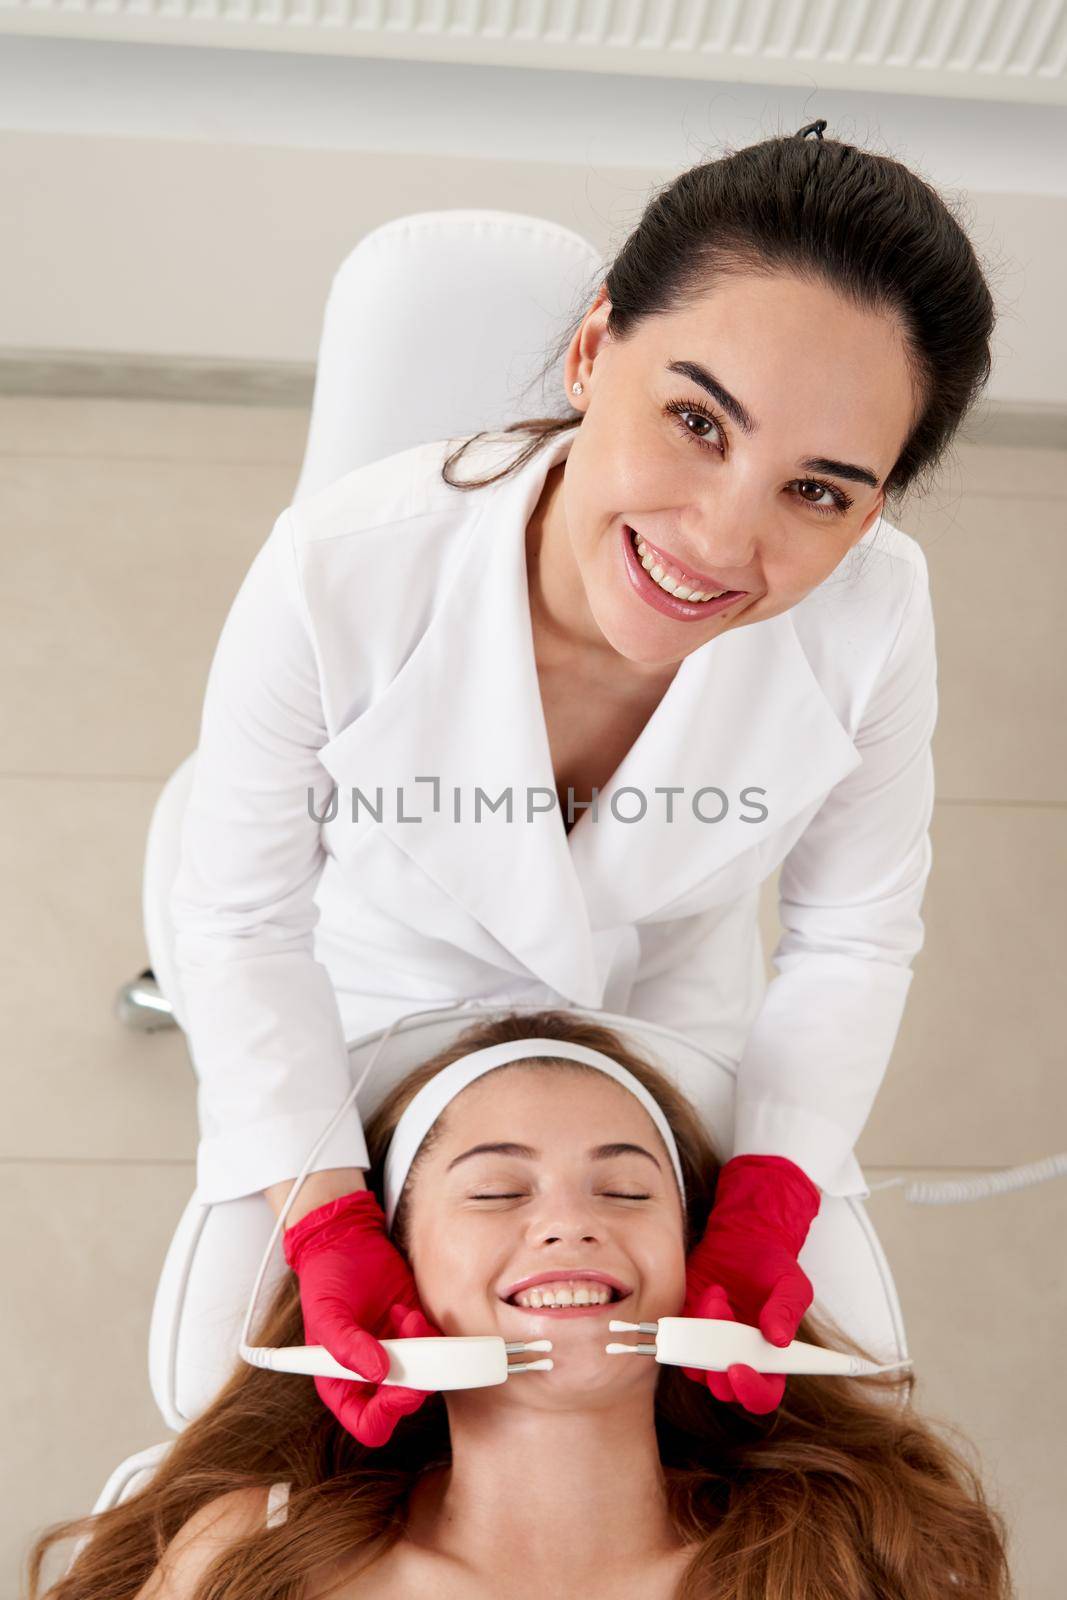 Beautiful Woman At Spa Clinic Receiving Stimulating Electric Facial Treatment From Therapist. Closeup Of Young Female Face During Microcurrent Therapy